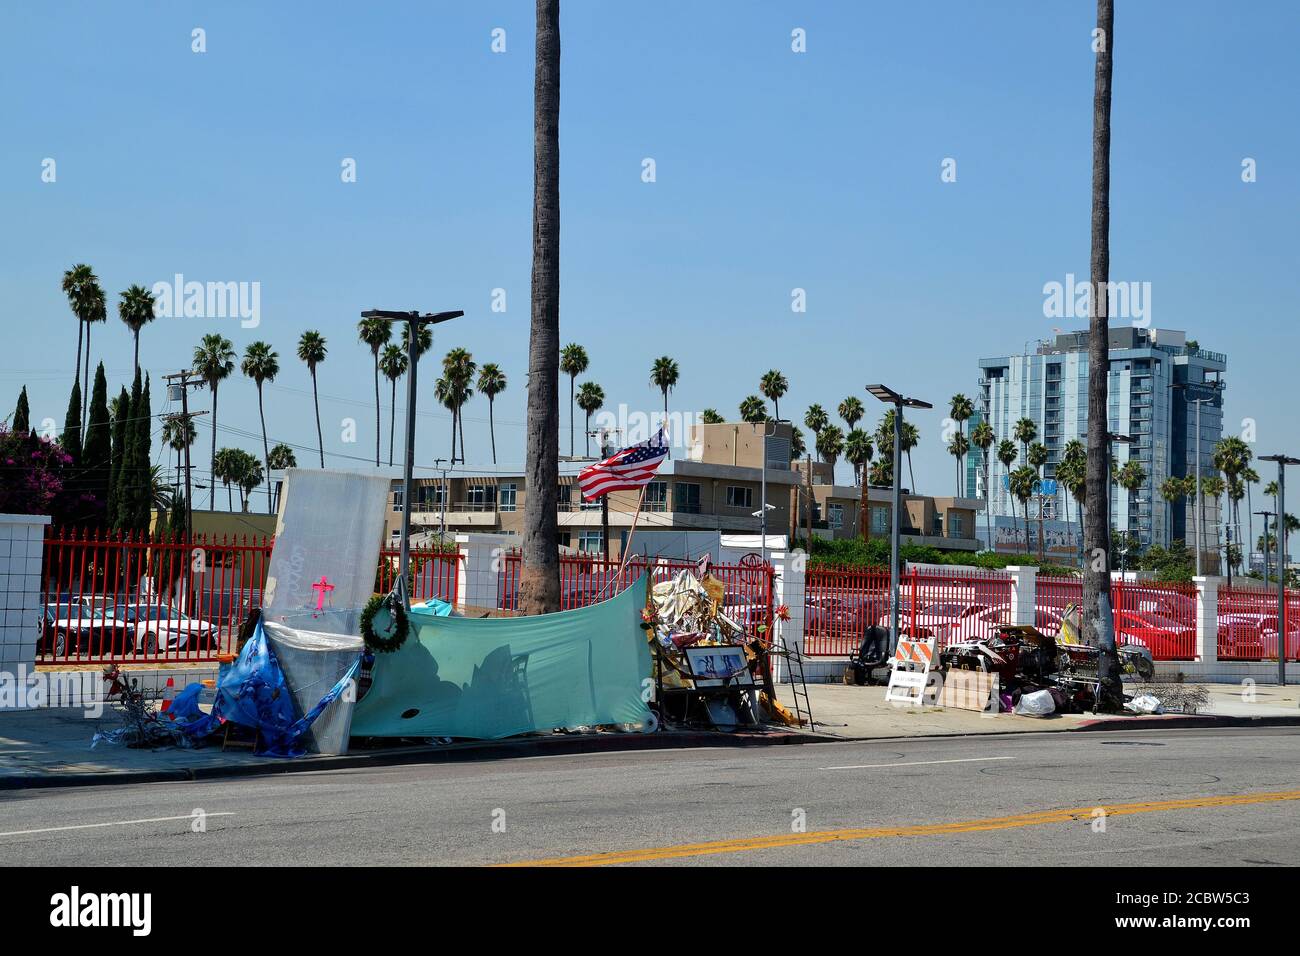 Los Angeles, CA, USA - August 14, 2020: Homeless people live in kind of shelter on Hollywood Blvd, a bad sign for social shortcomings Stock Photo